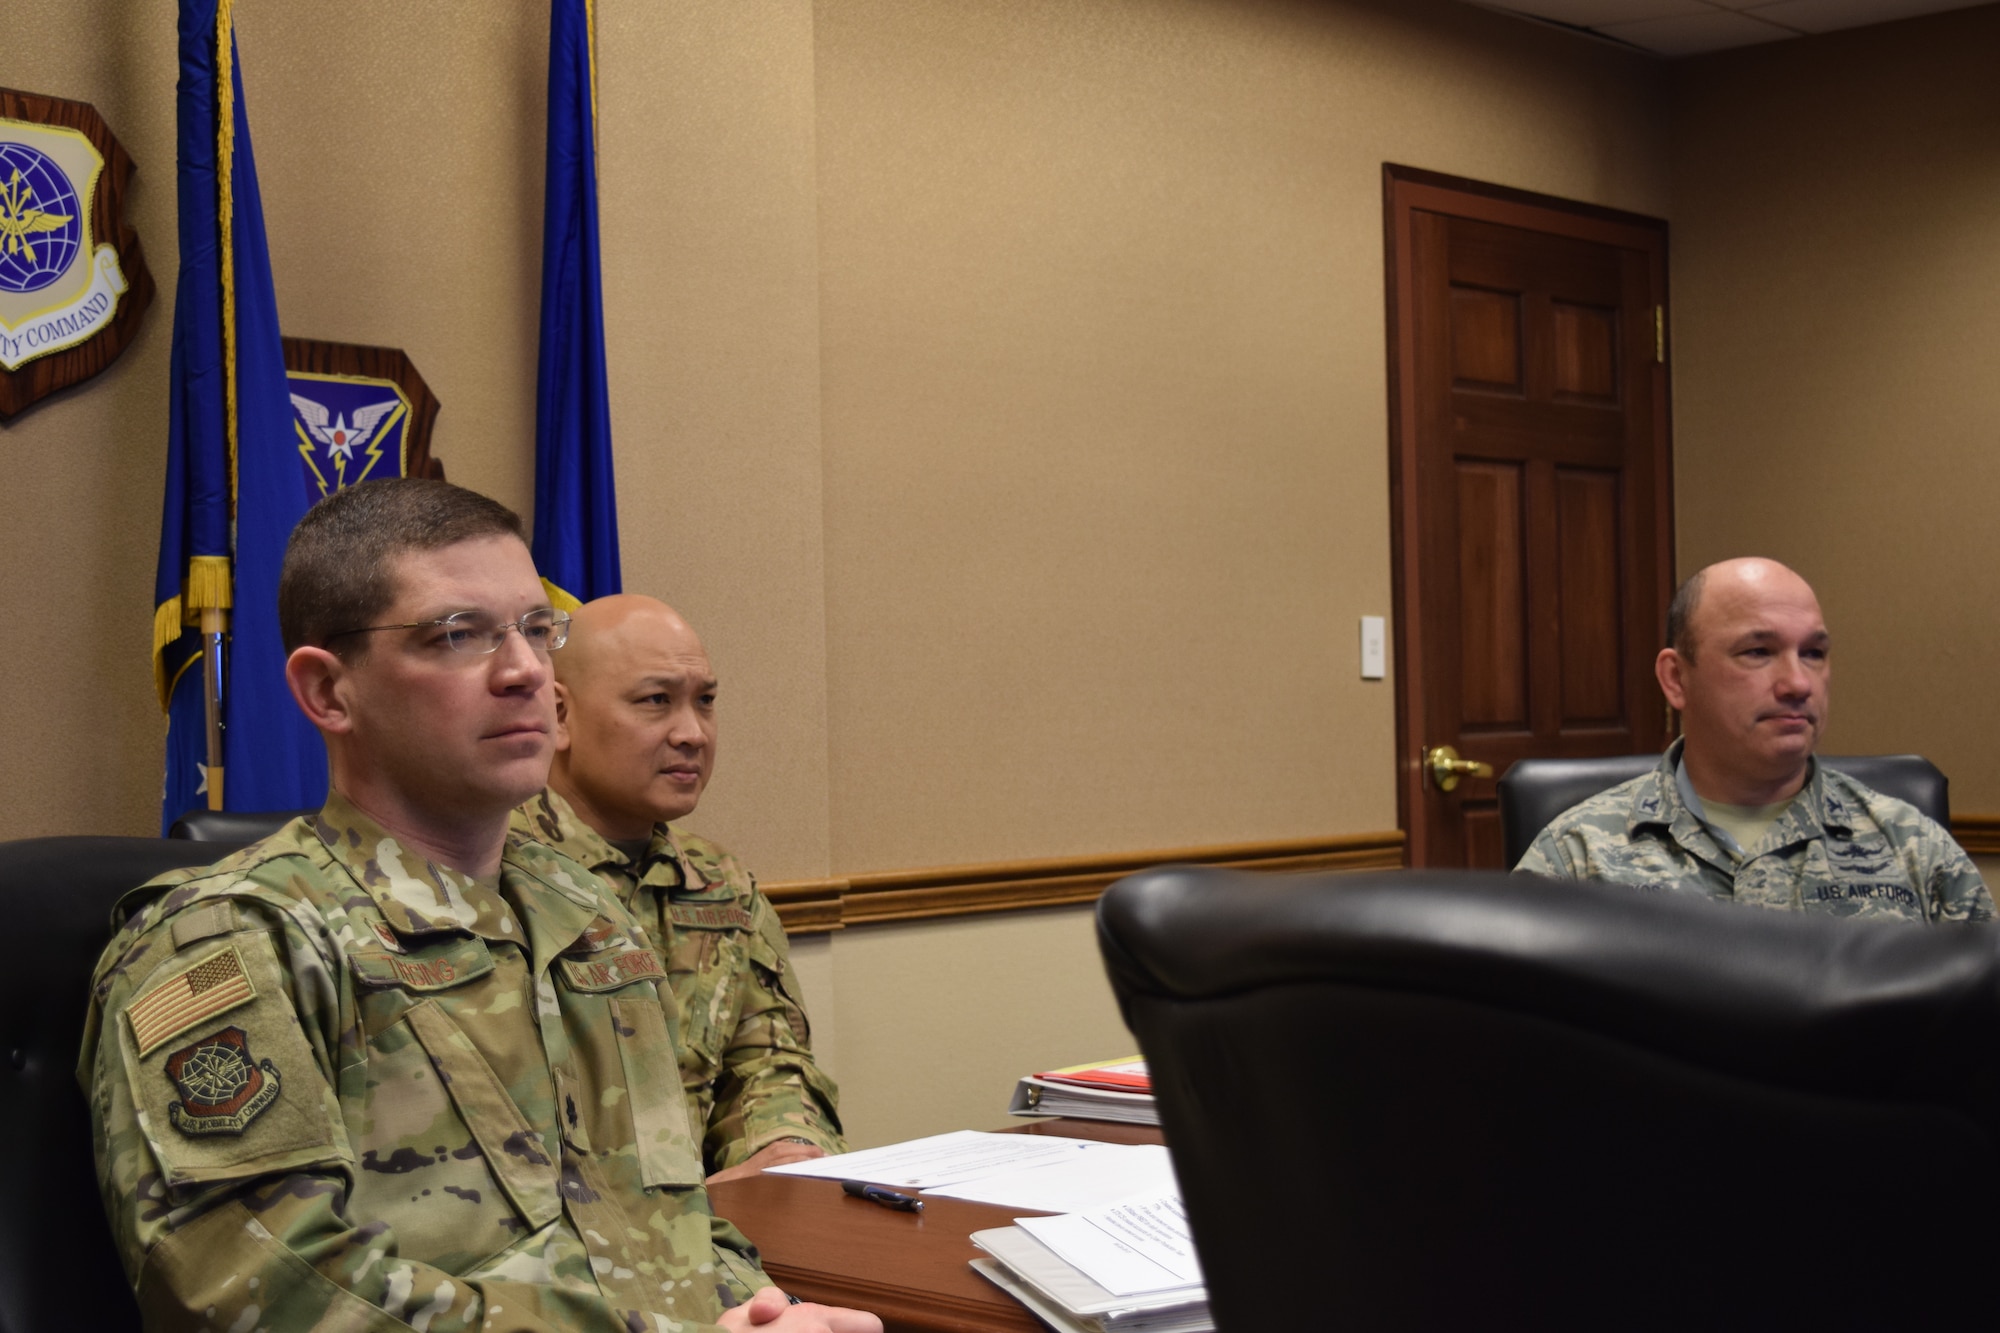 Lt Col Frank Theising 375th Communications Squadron Commander, Brig Gen Jimmy Canlas 618th Air Operations Center Commander, and Col Kyle Mikos Air Mobility Command Director of Cyberspace Forces were briefed at the conclusion of the exercise.